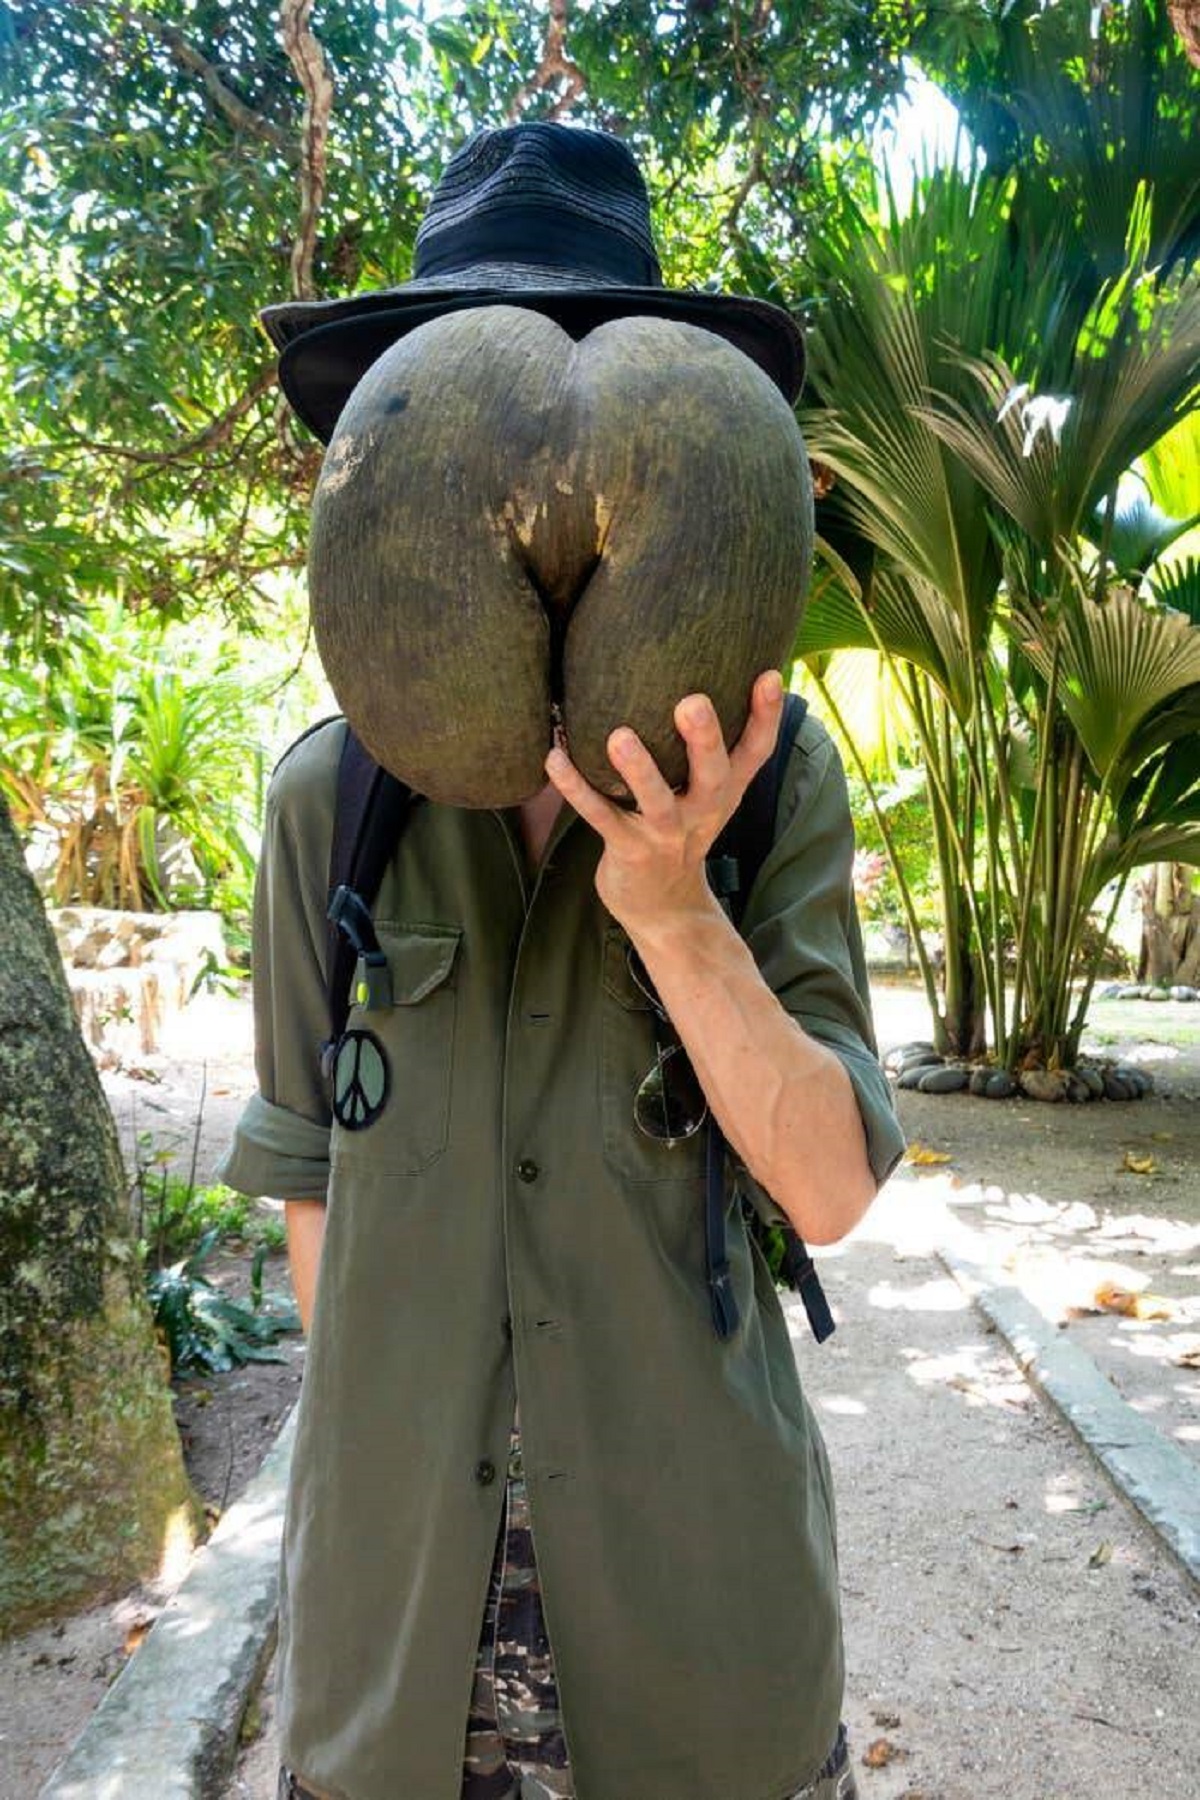 This is how large the biggest seed on the planet, the double coconut seed, is compared with a person: